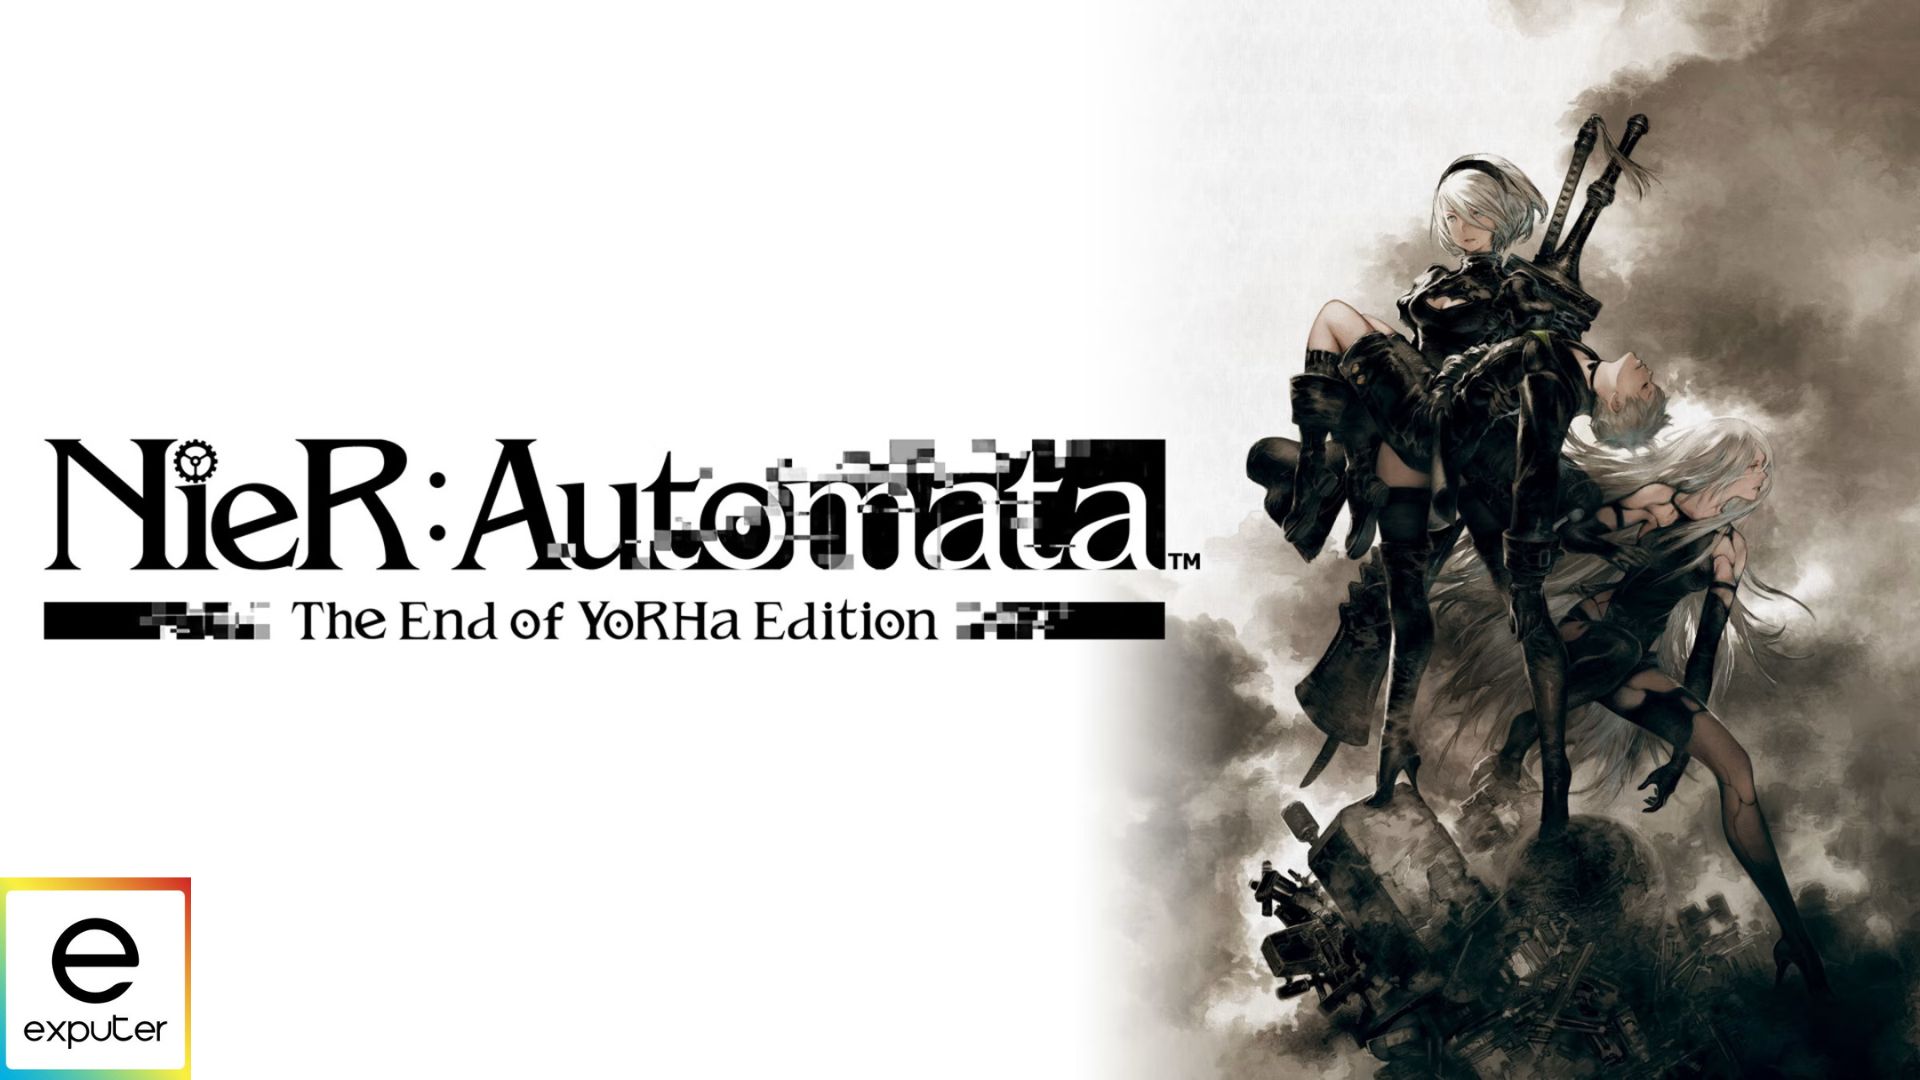 NieR Automata - The End of YoRHa Edition Review